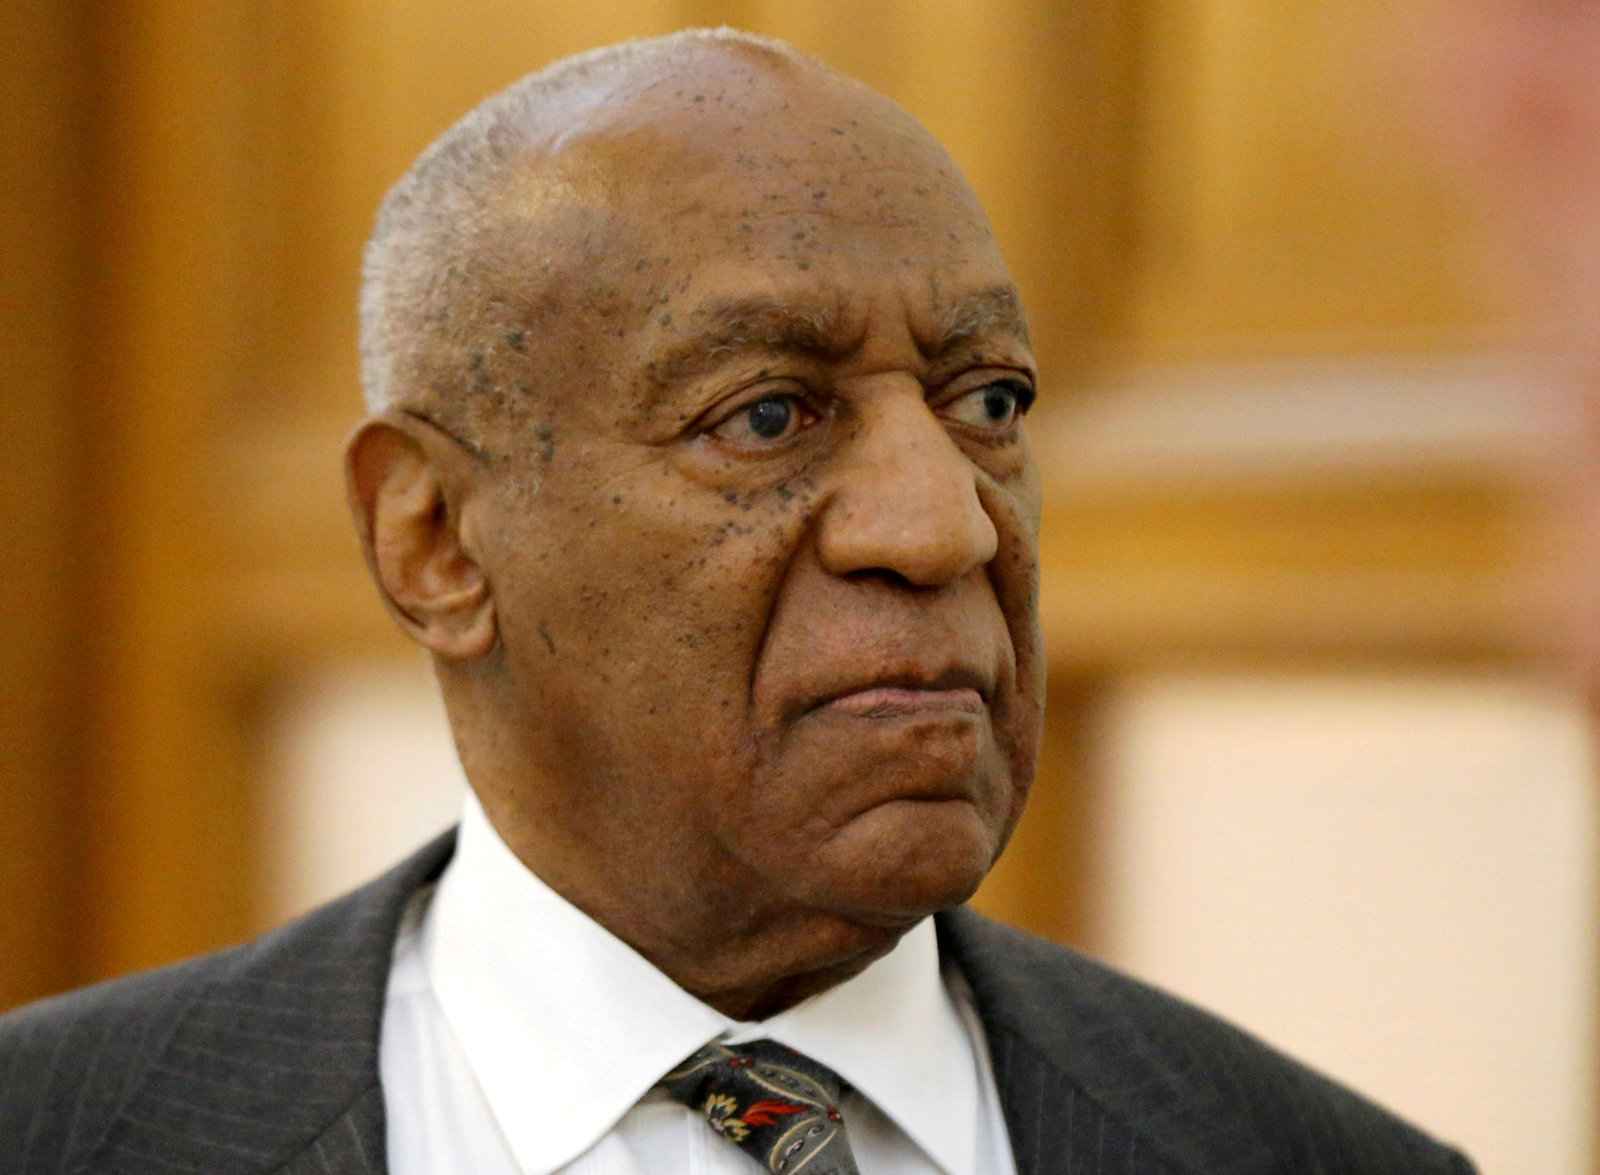 Cosby S Sex Assault Trial To Begin After Years Of U S Allegations